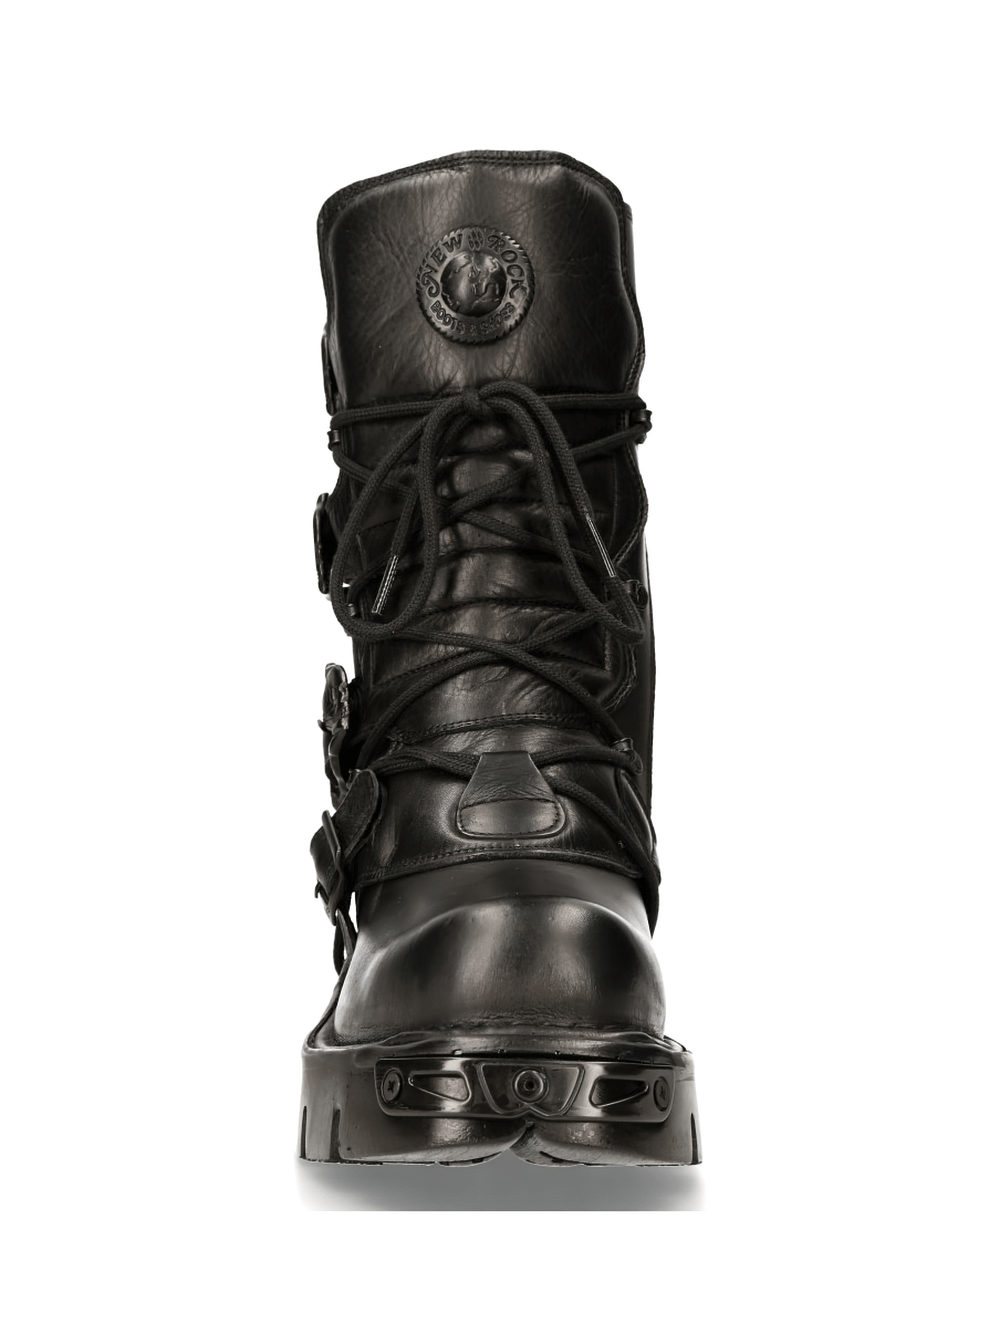 NEW ROCK Rugged Lace-Up Military Boots with Buckles